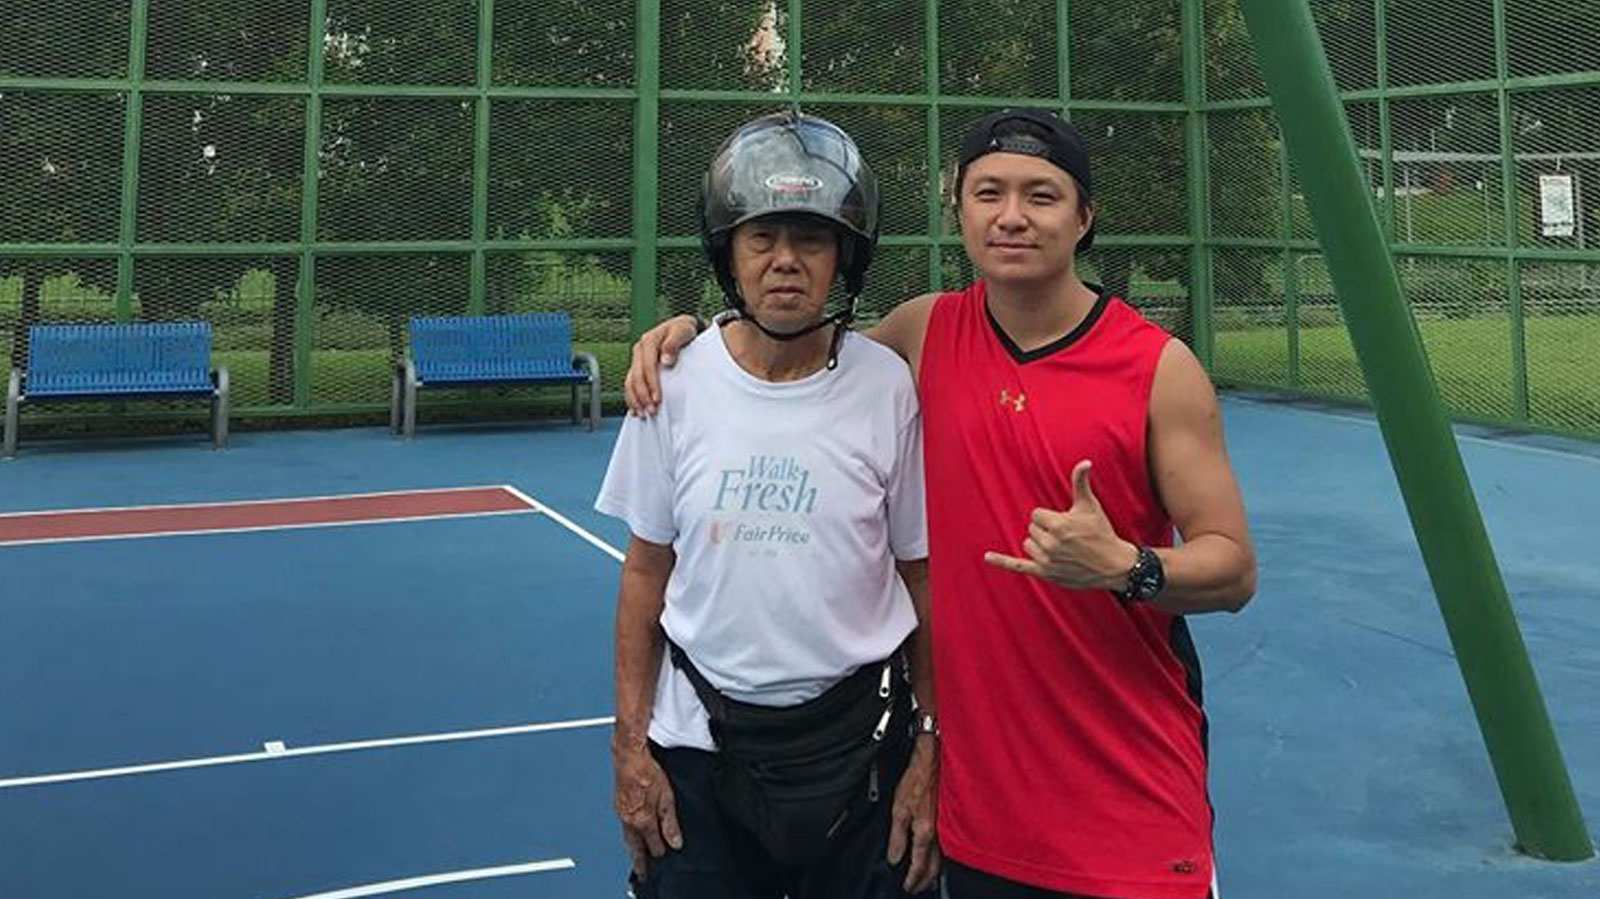 For the past eight years, this elderly man has voluntarily fixed public basketball court nets for free